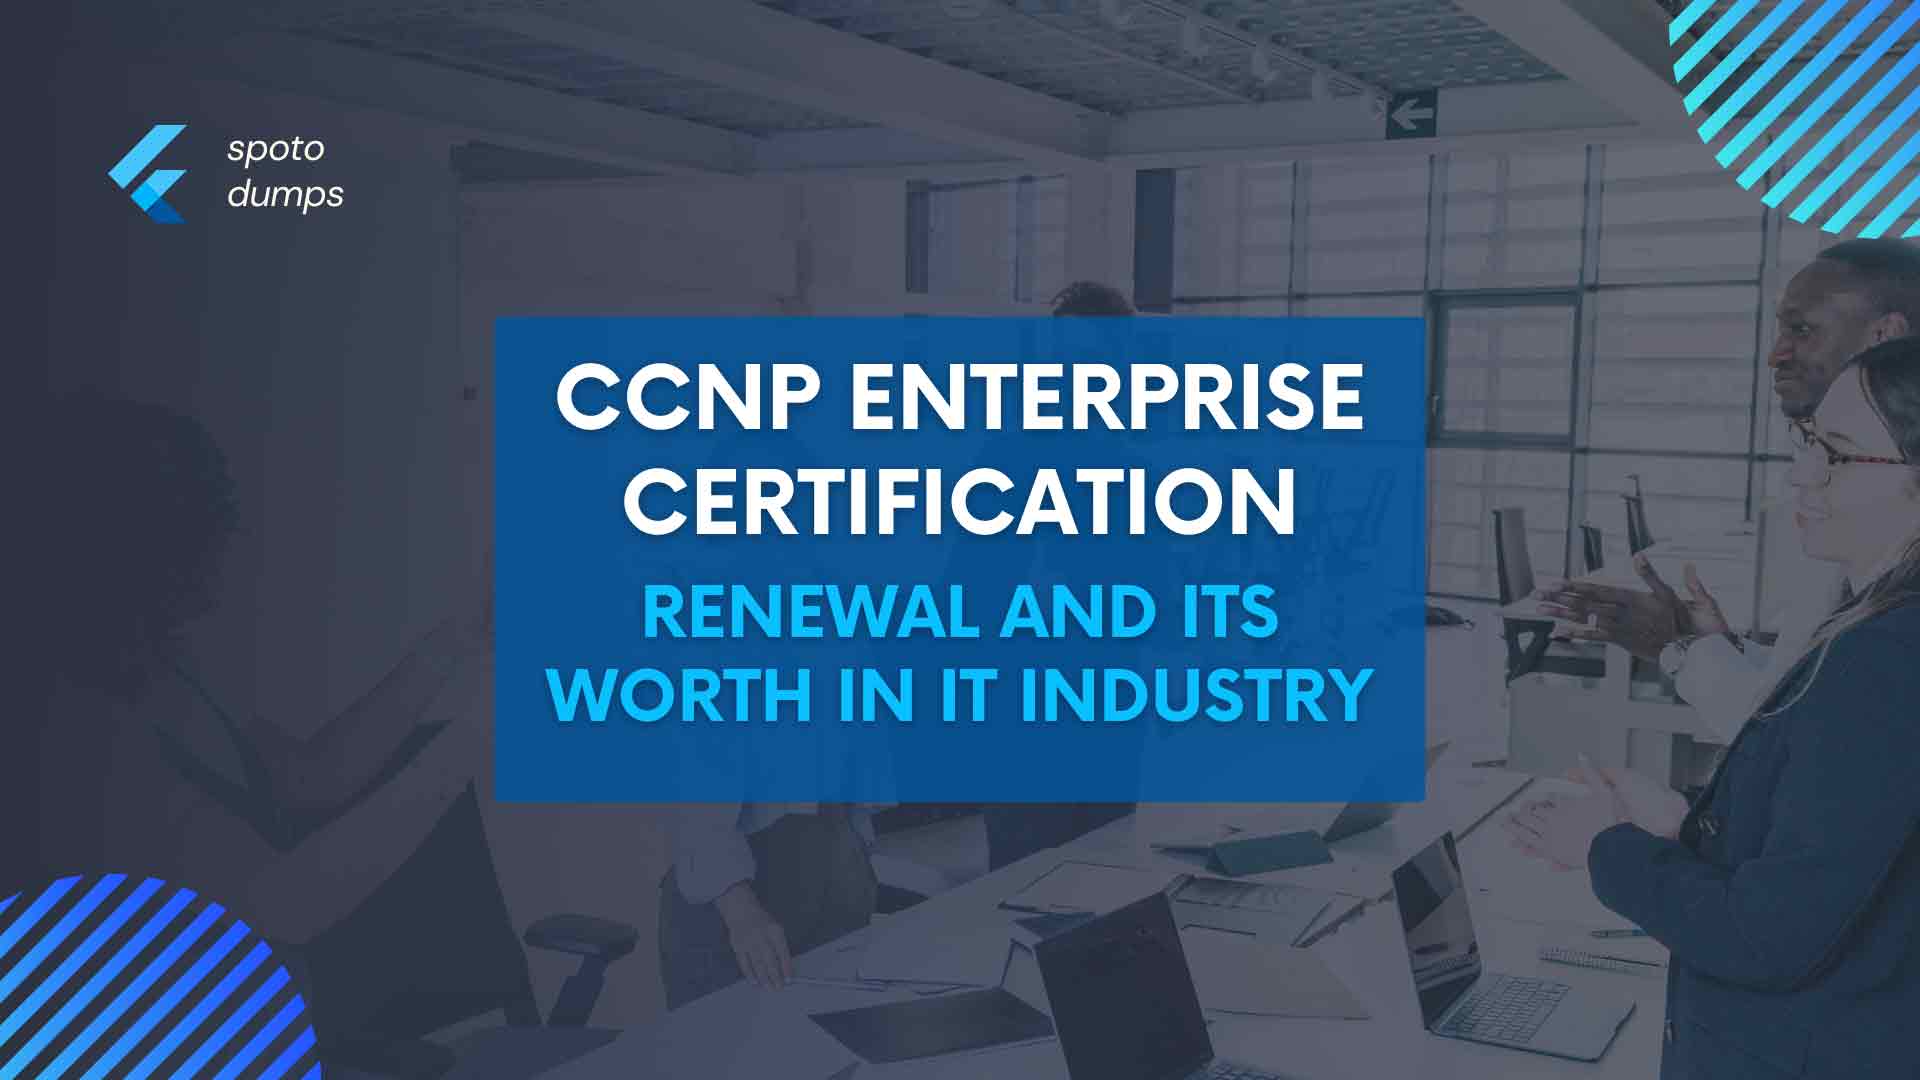 CCNP Enterprise Certification Renewal and Its Worth in IT Industry